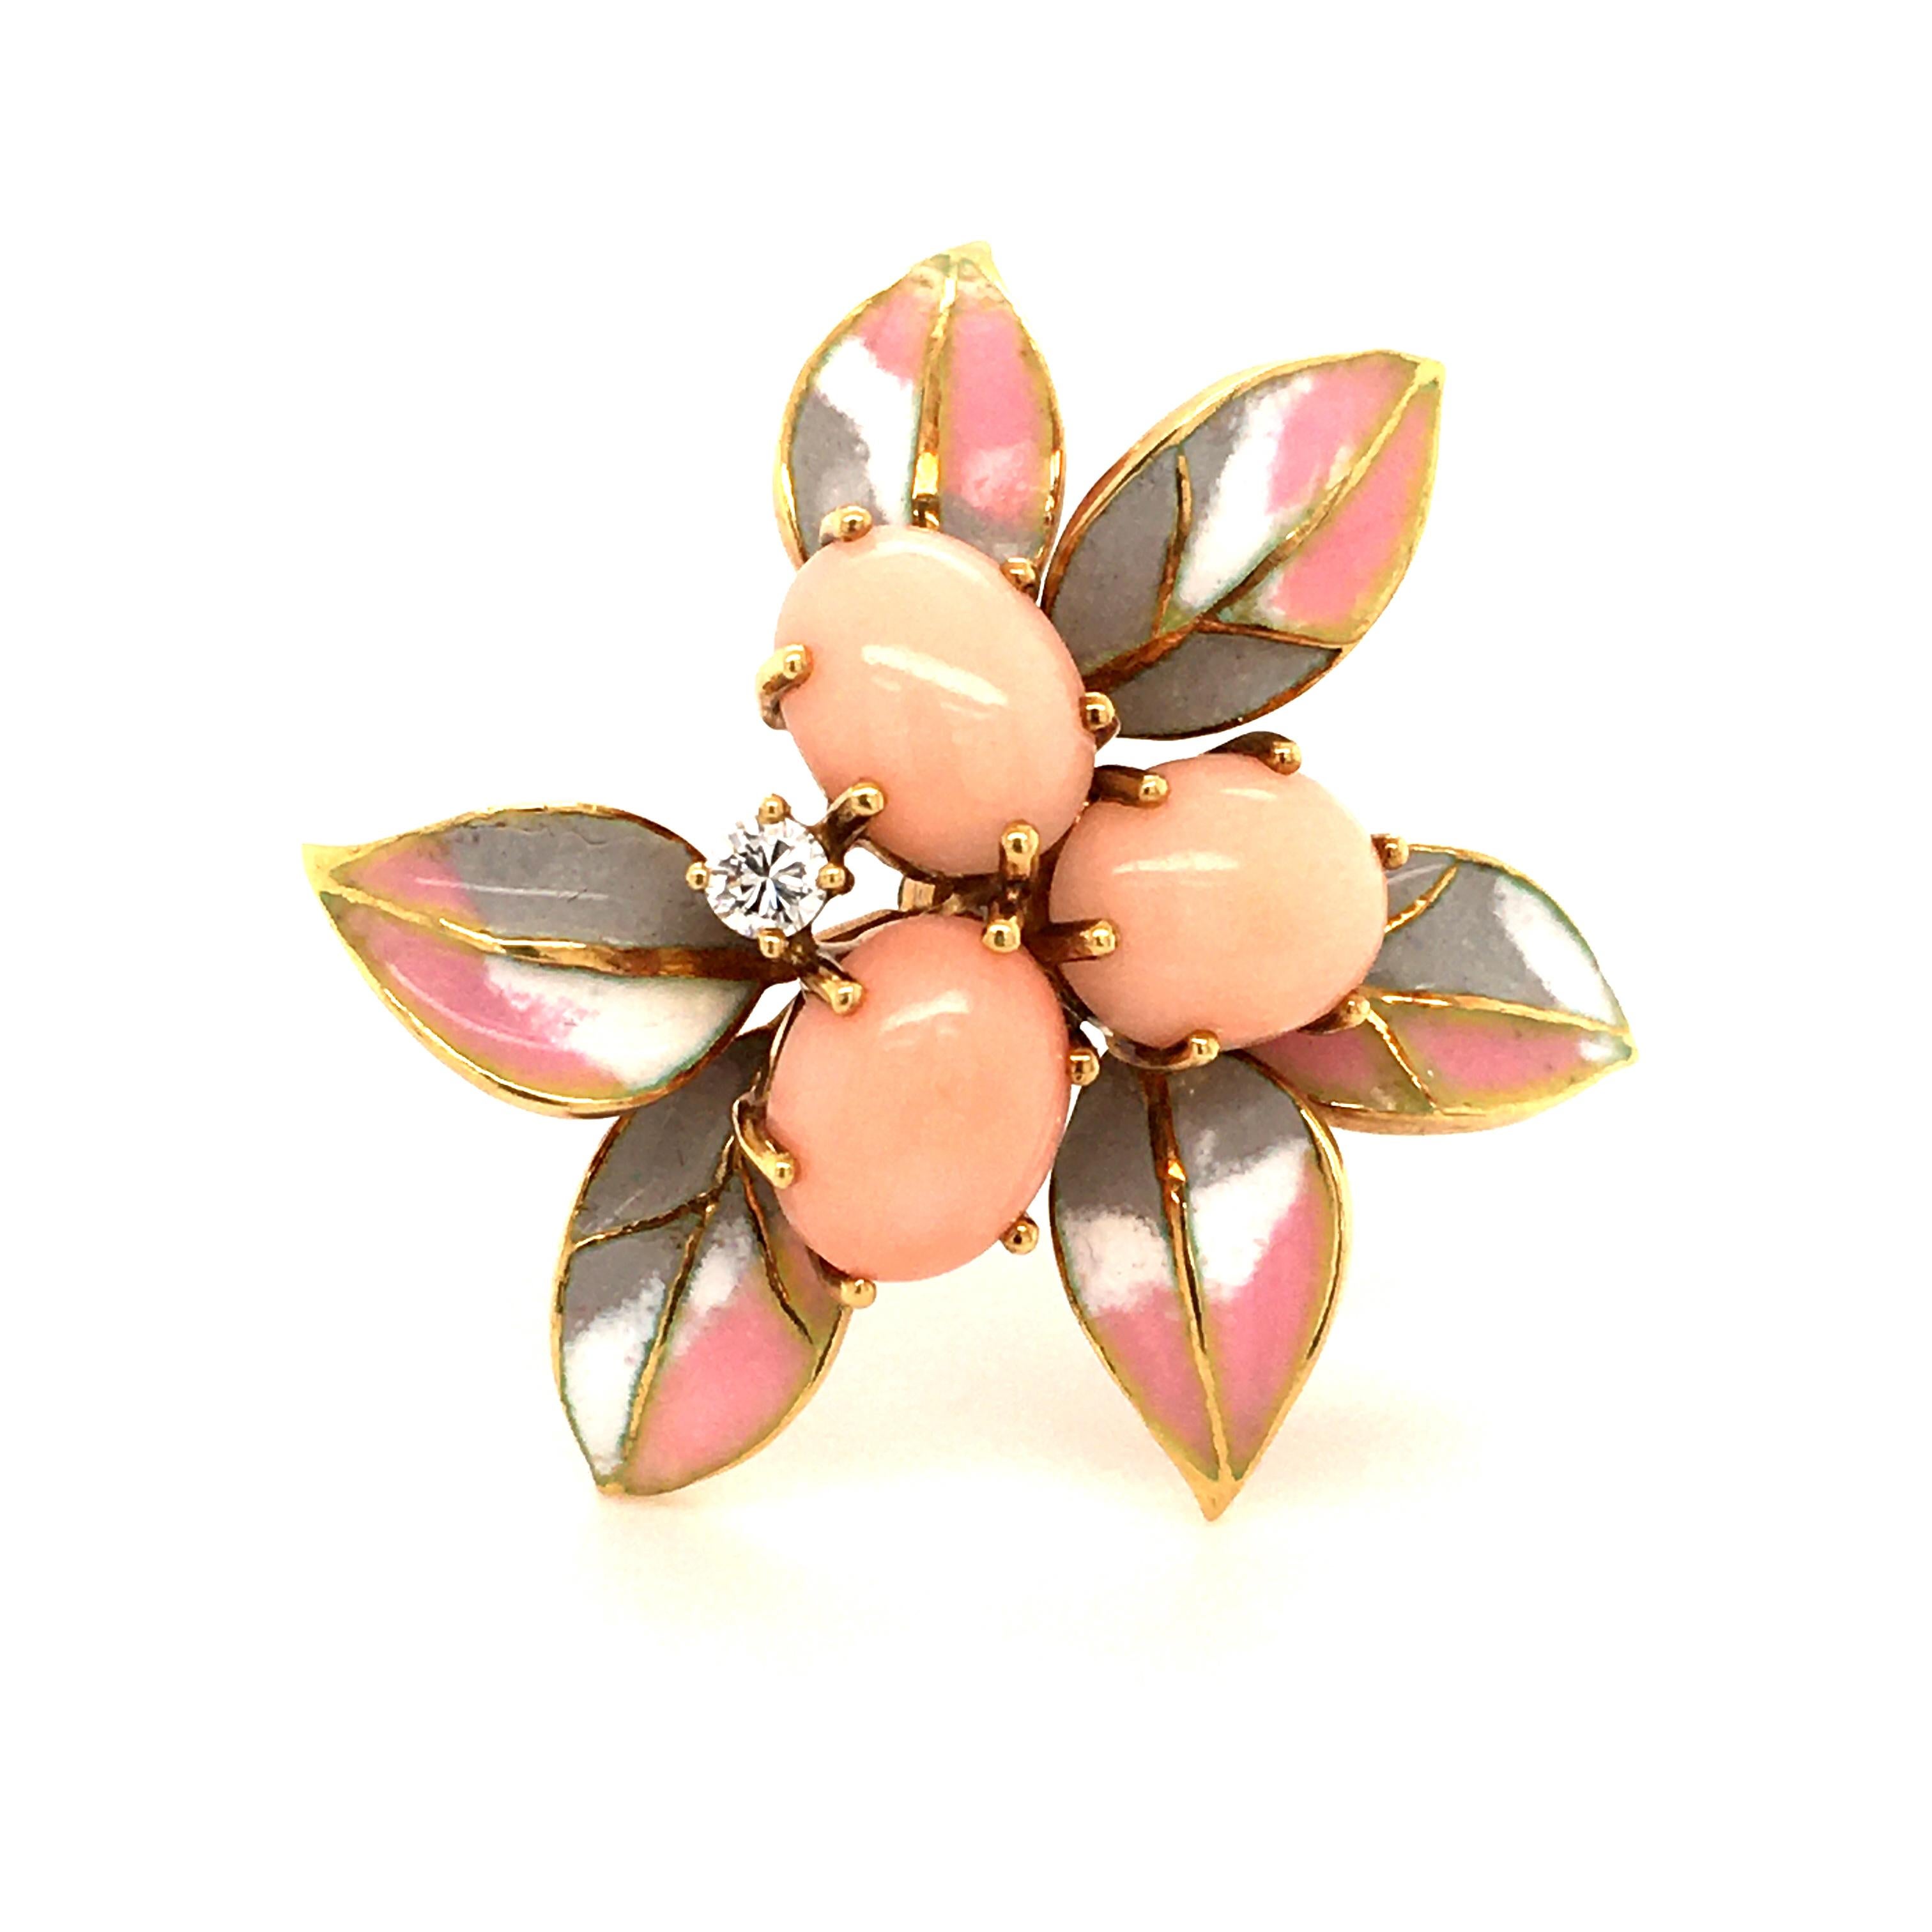 This elegant flower brooch in 18 karat yellow gold features three oval cabochon shaped corals and one brilliant cut diamond of 0.09 carats, G/H color and vs clarity. The leaves are softly enameled in the colors rose, gray, and white. A very lovely